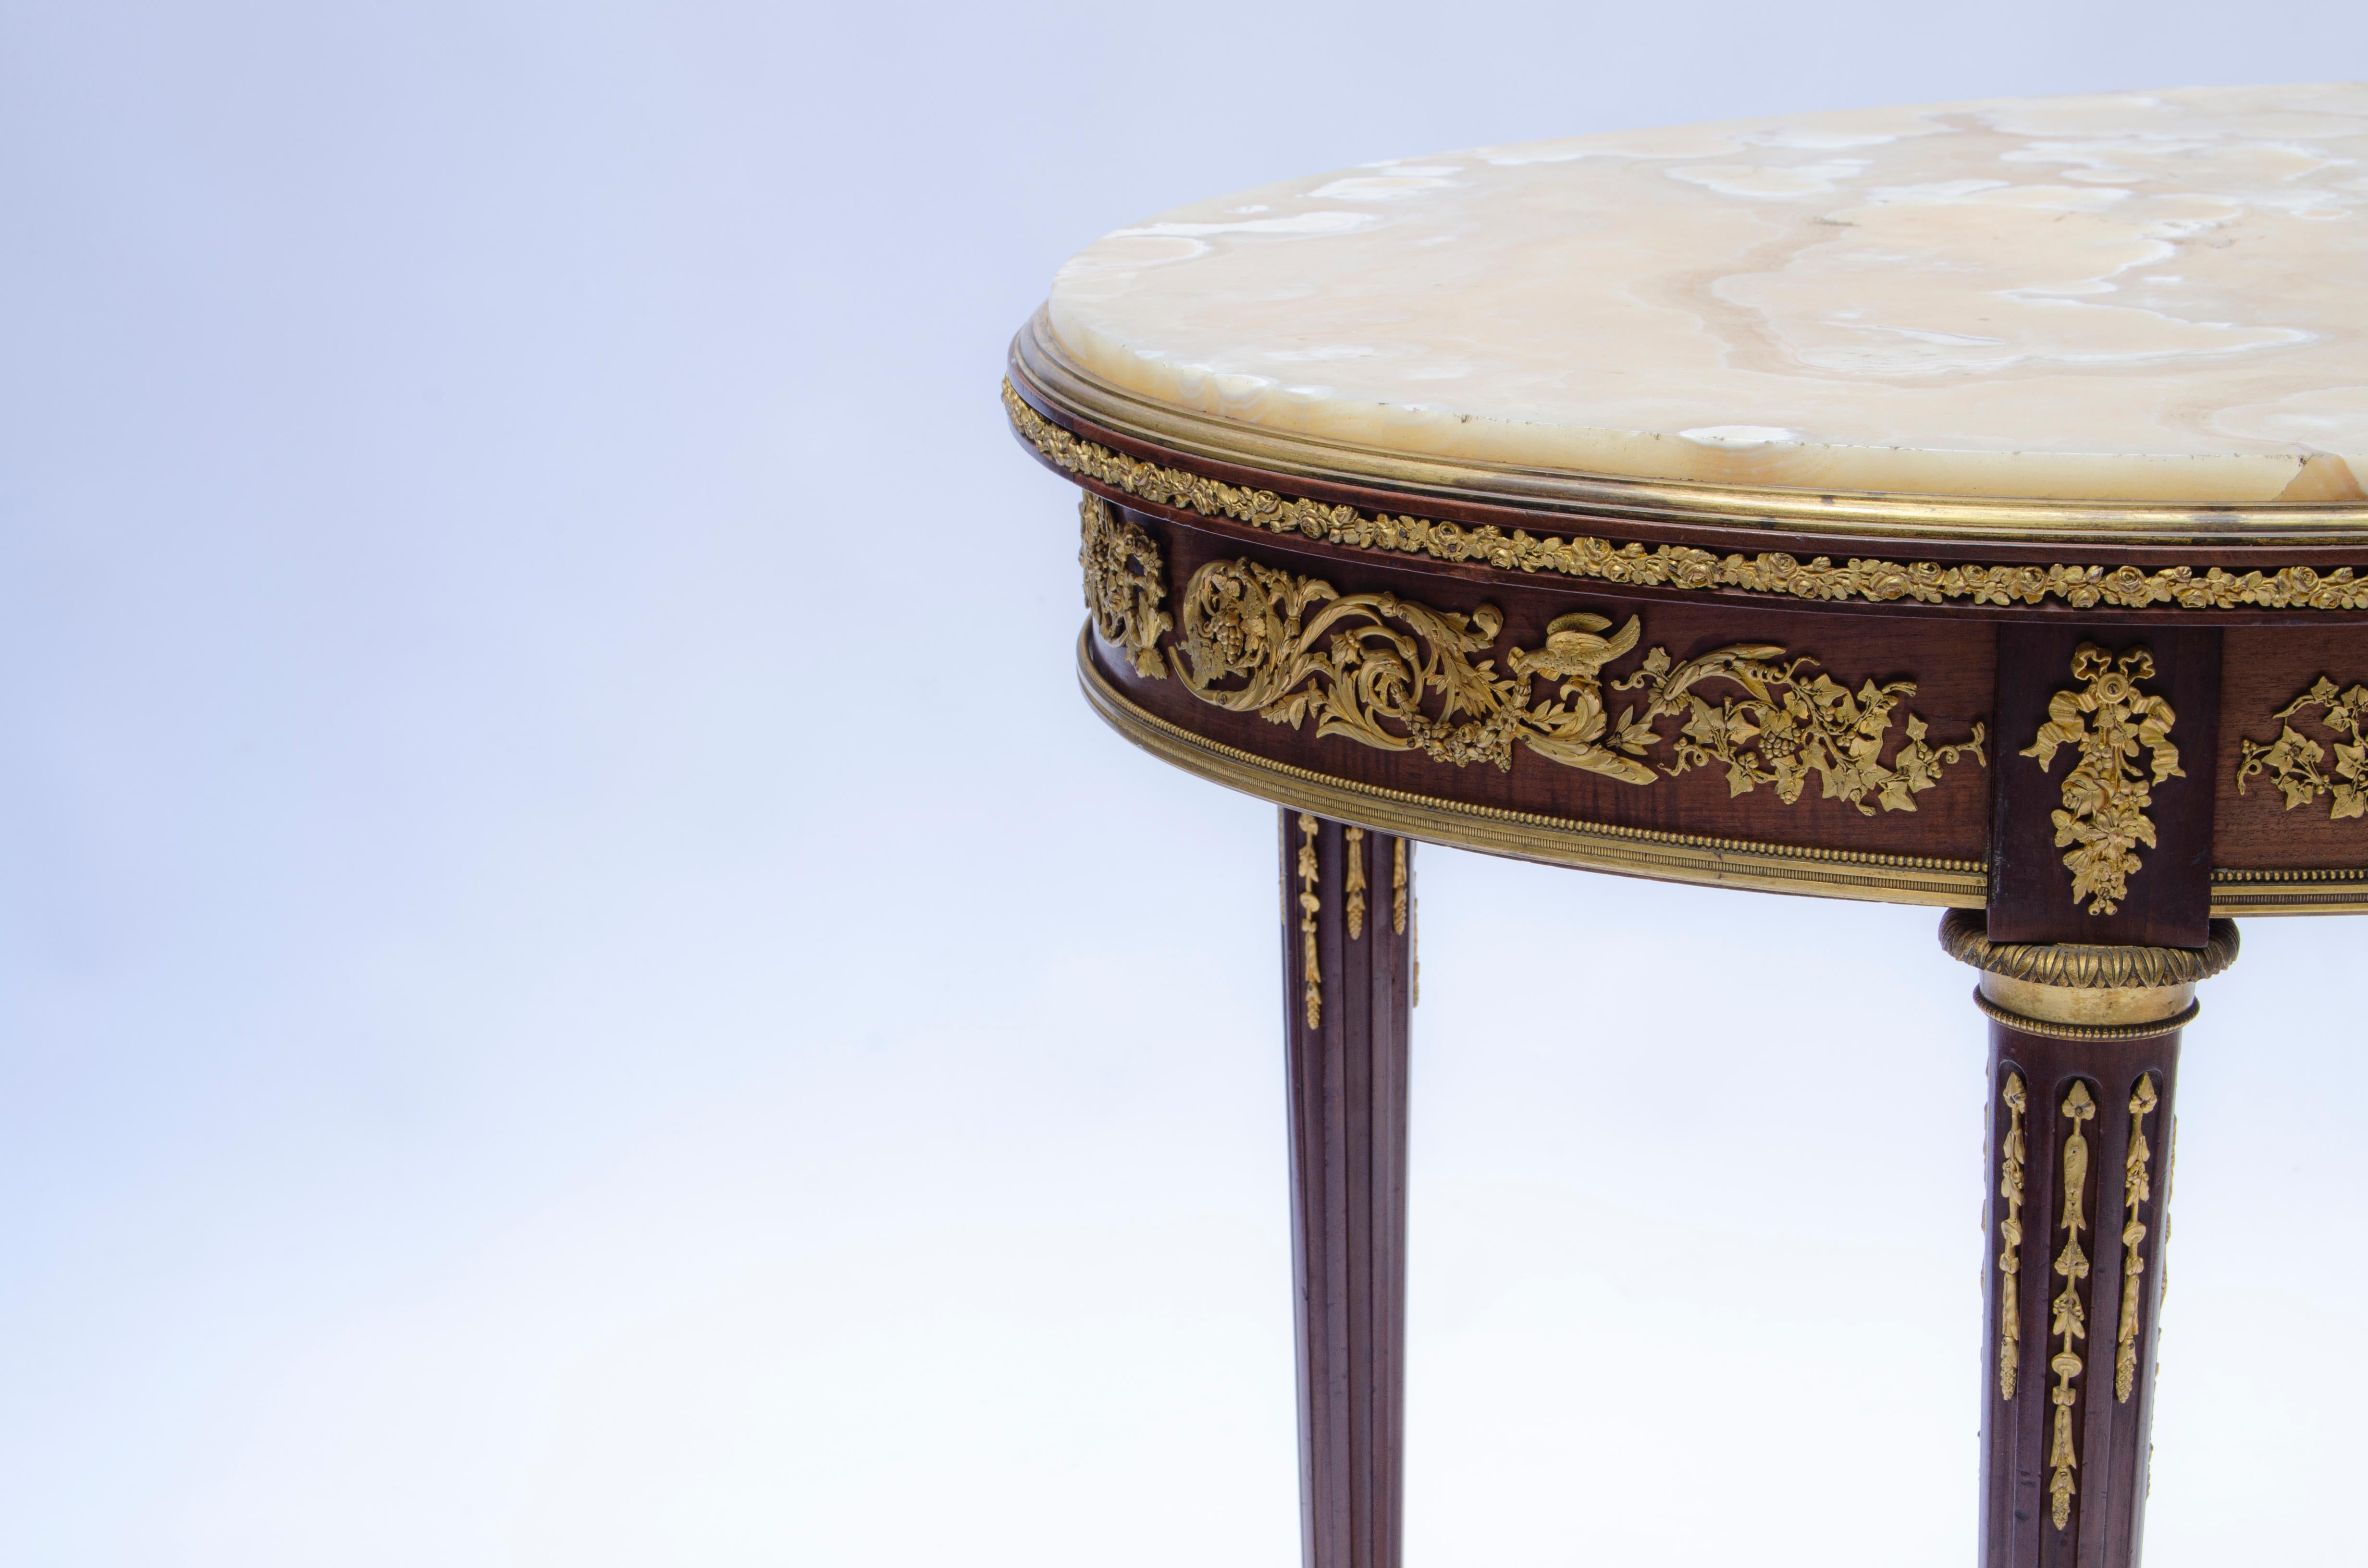 Oval French side table, Louis XVI style, made of mahogany wood and gilt bronze (Ormolu), mounted on guéridon and marble top. In its design, we can distinguish that it has bronze garlands around it at the top. On its legs, the details of flowers and